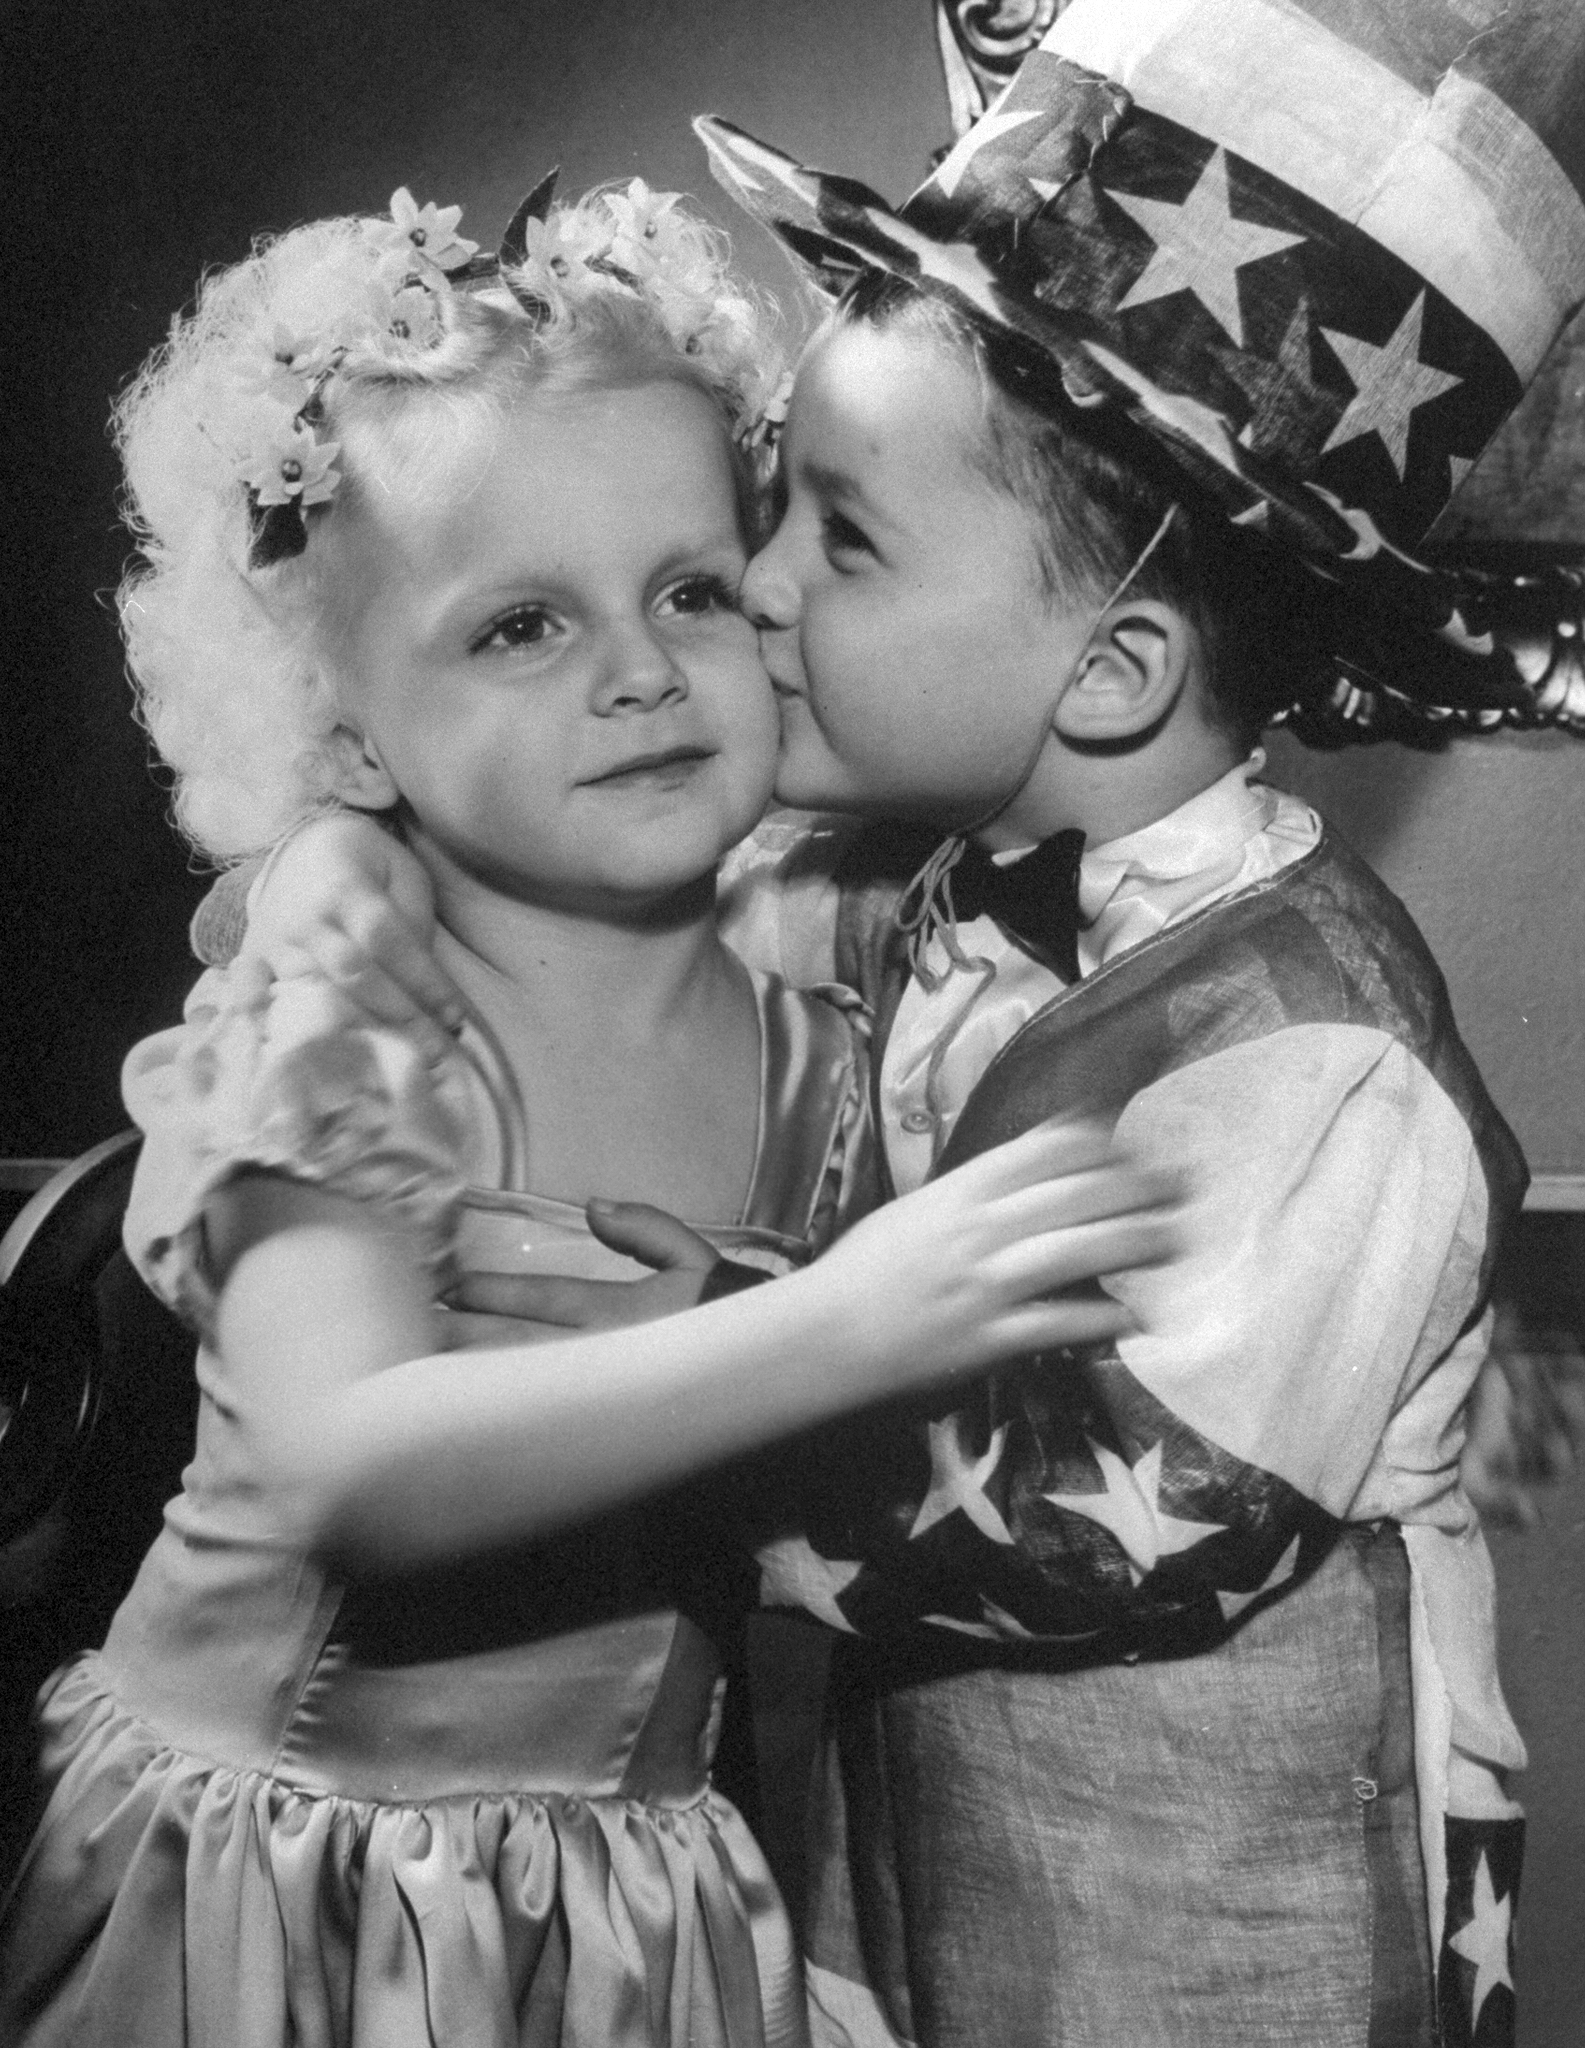 A little boy dressed as Uncle Sam, kissing a little girl on the cheek.1945.